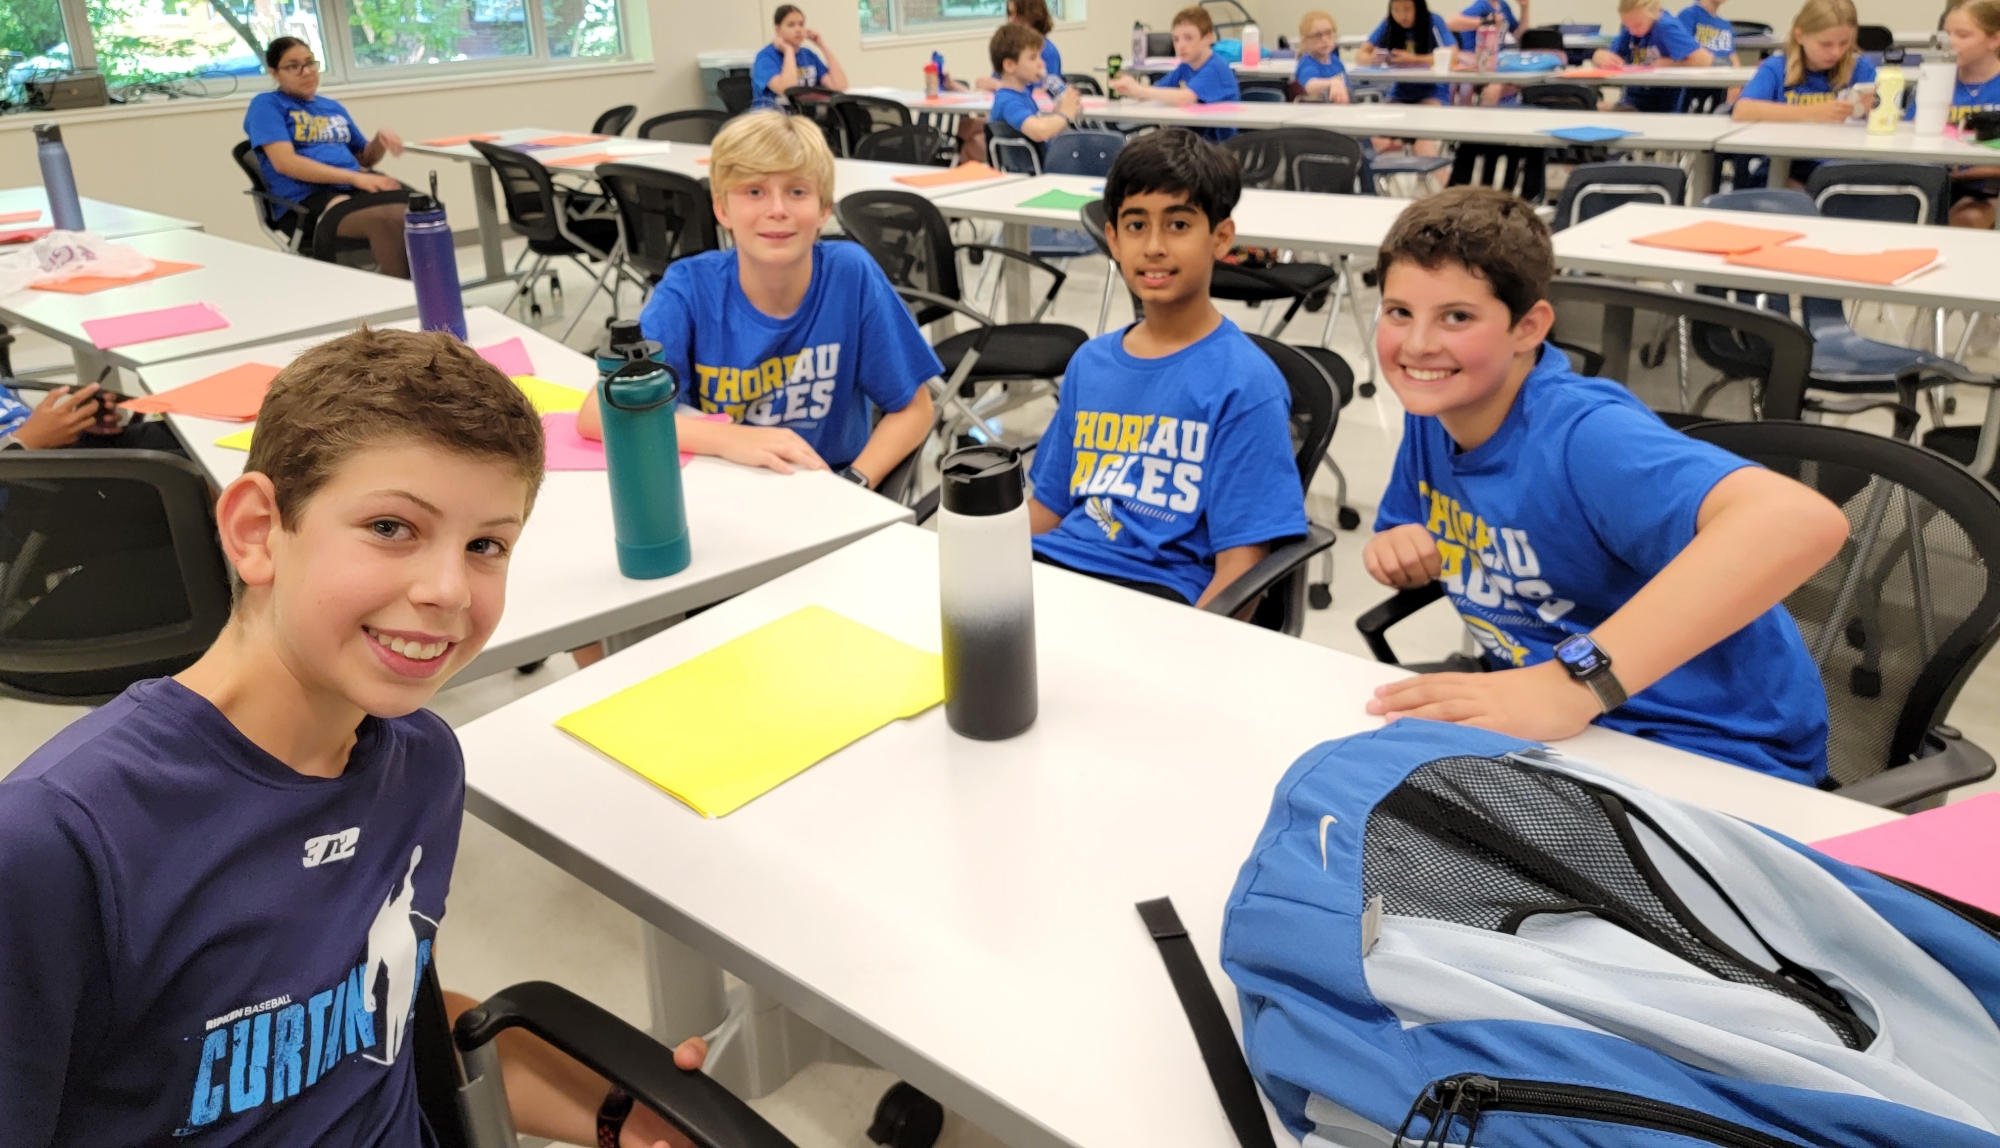 excellence-in-action-session-one-photo-gallery-thoreau-middle-school